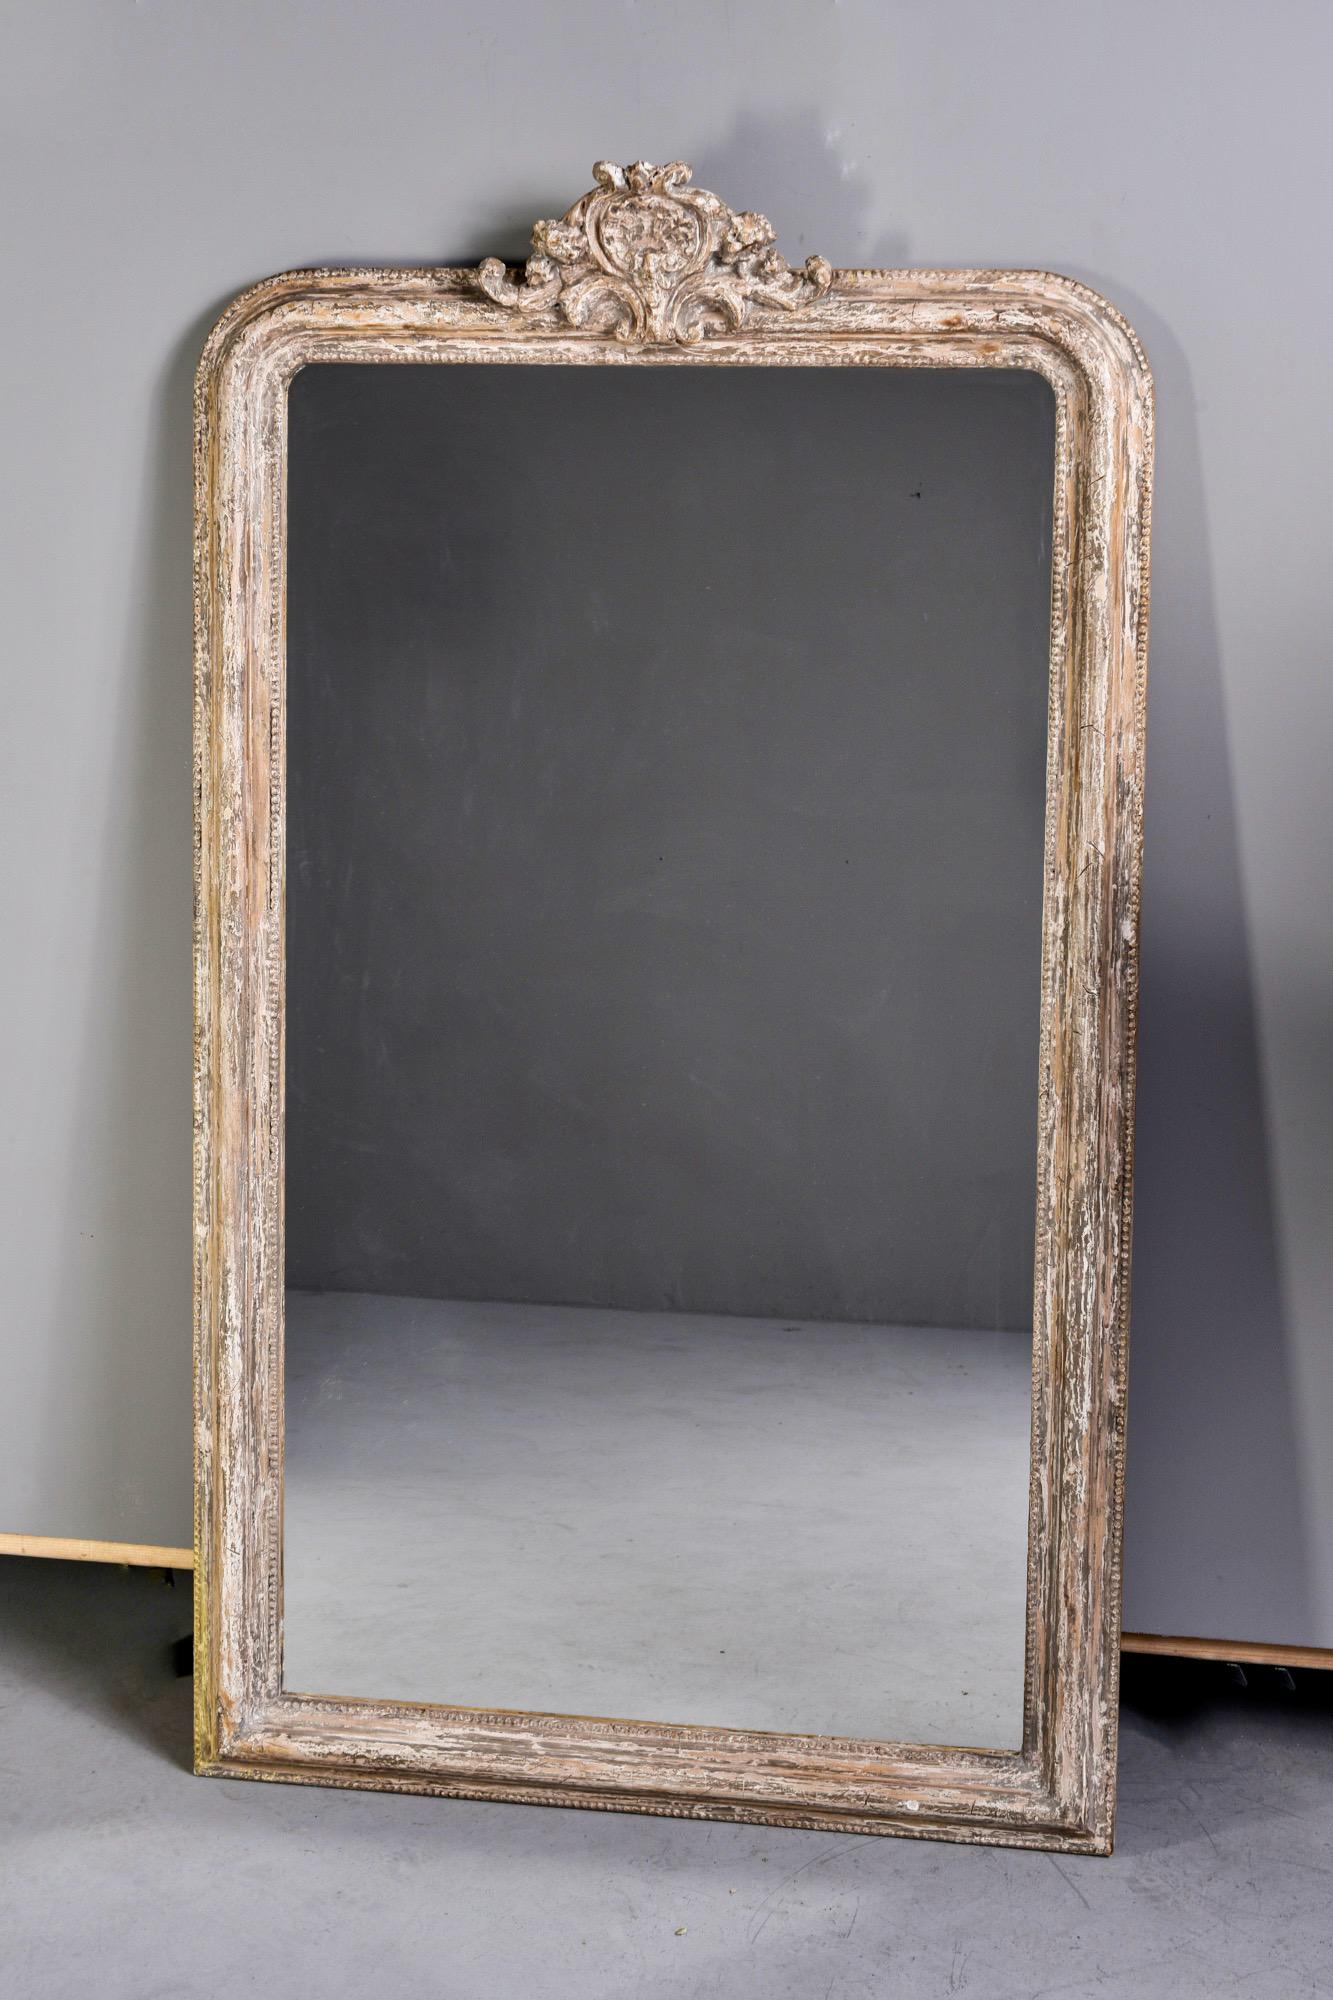 Louis Philippe mirror is five and half feet tall and features a white painted frame and carved crest, circa 1860s. Actual mirror size: 53.75” H x 30.25” W. Unknown maker.